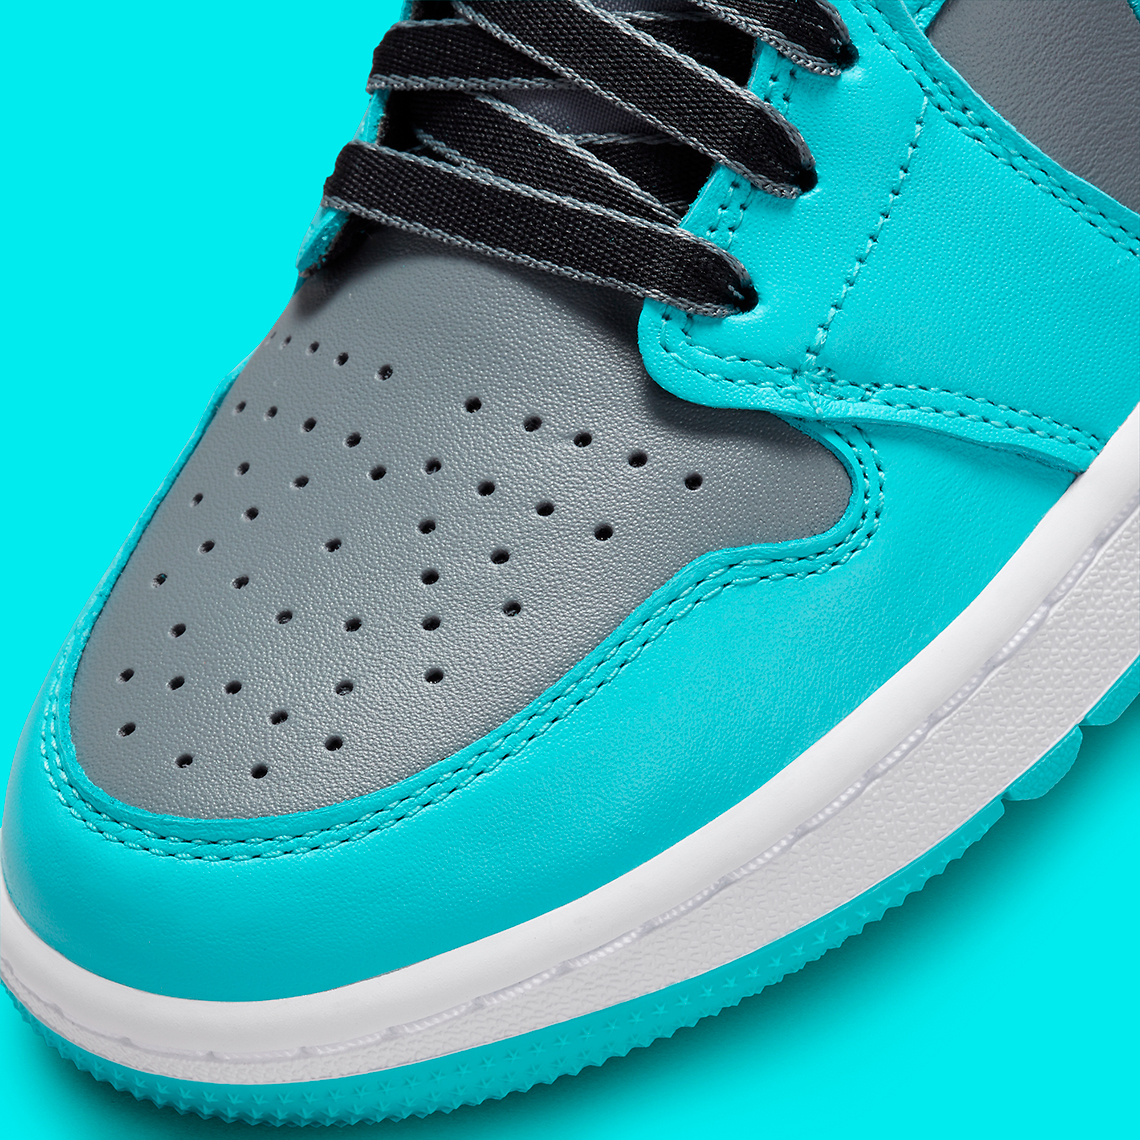 Jordan "Ready to Fly" With Golf Turquoise Fz3248 001 5